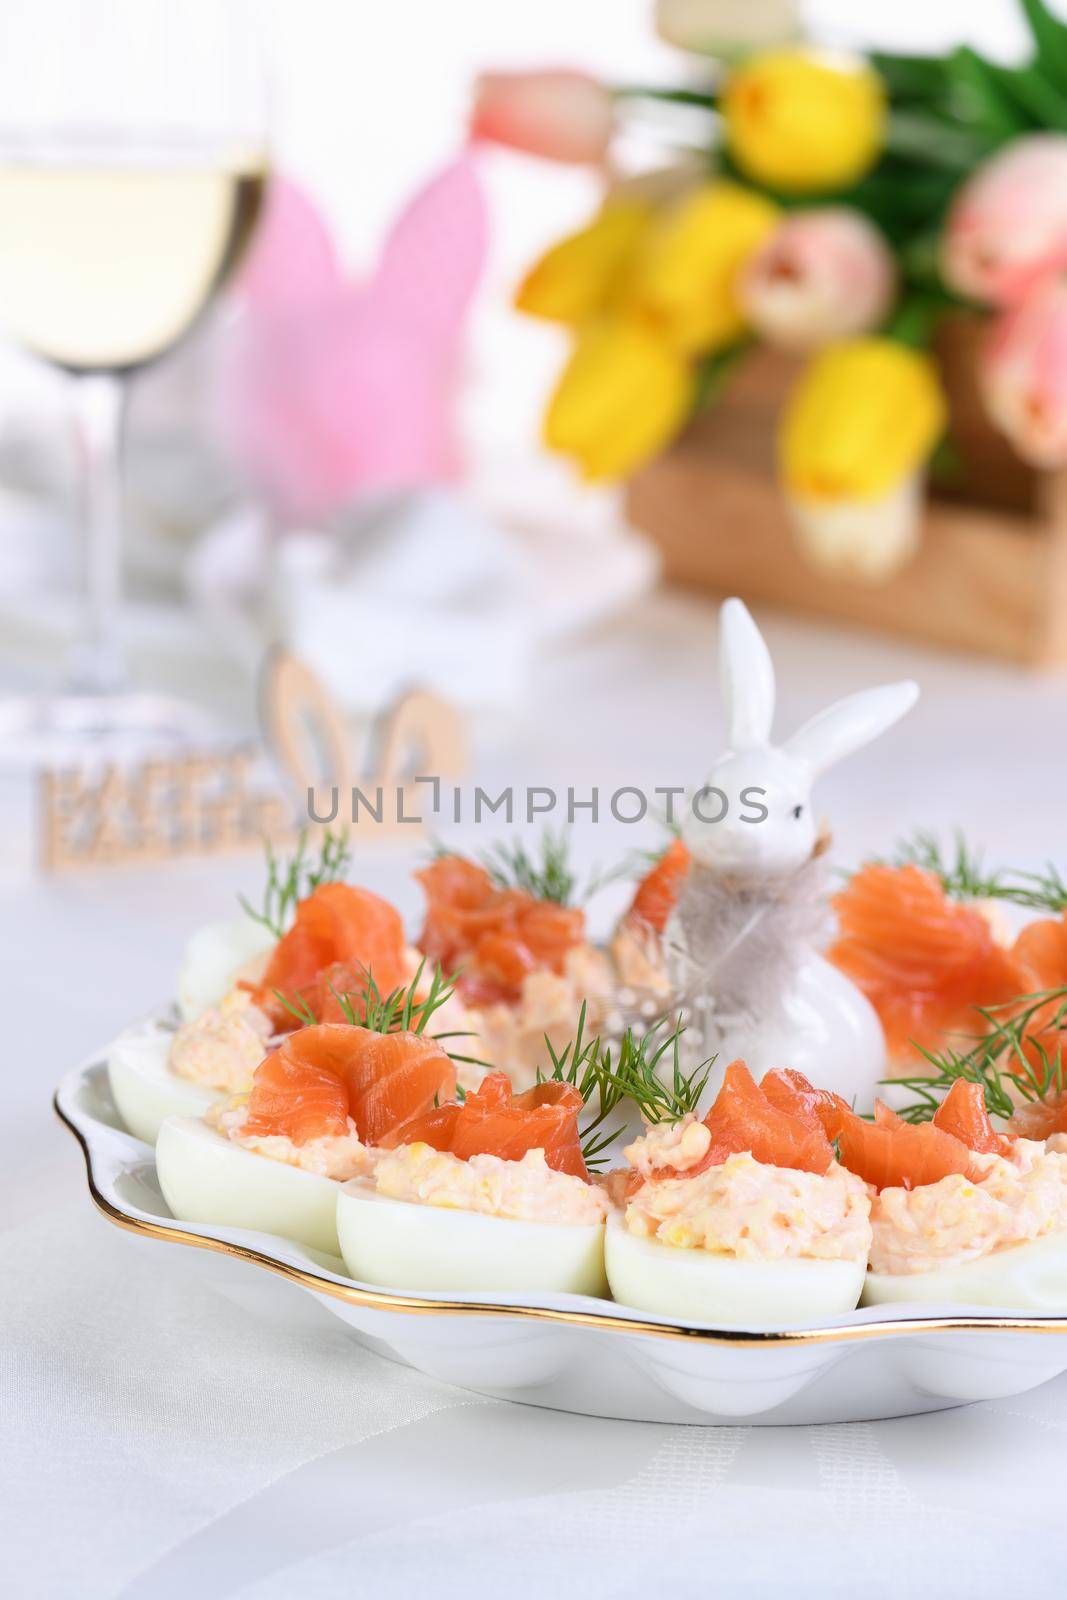 Stuffed eggs Easter appetizer by Apolonia